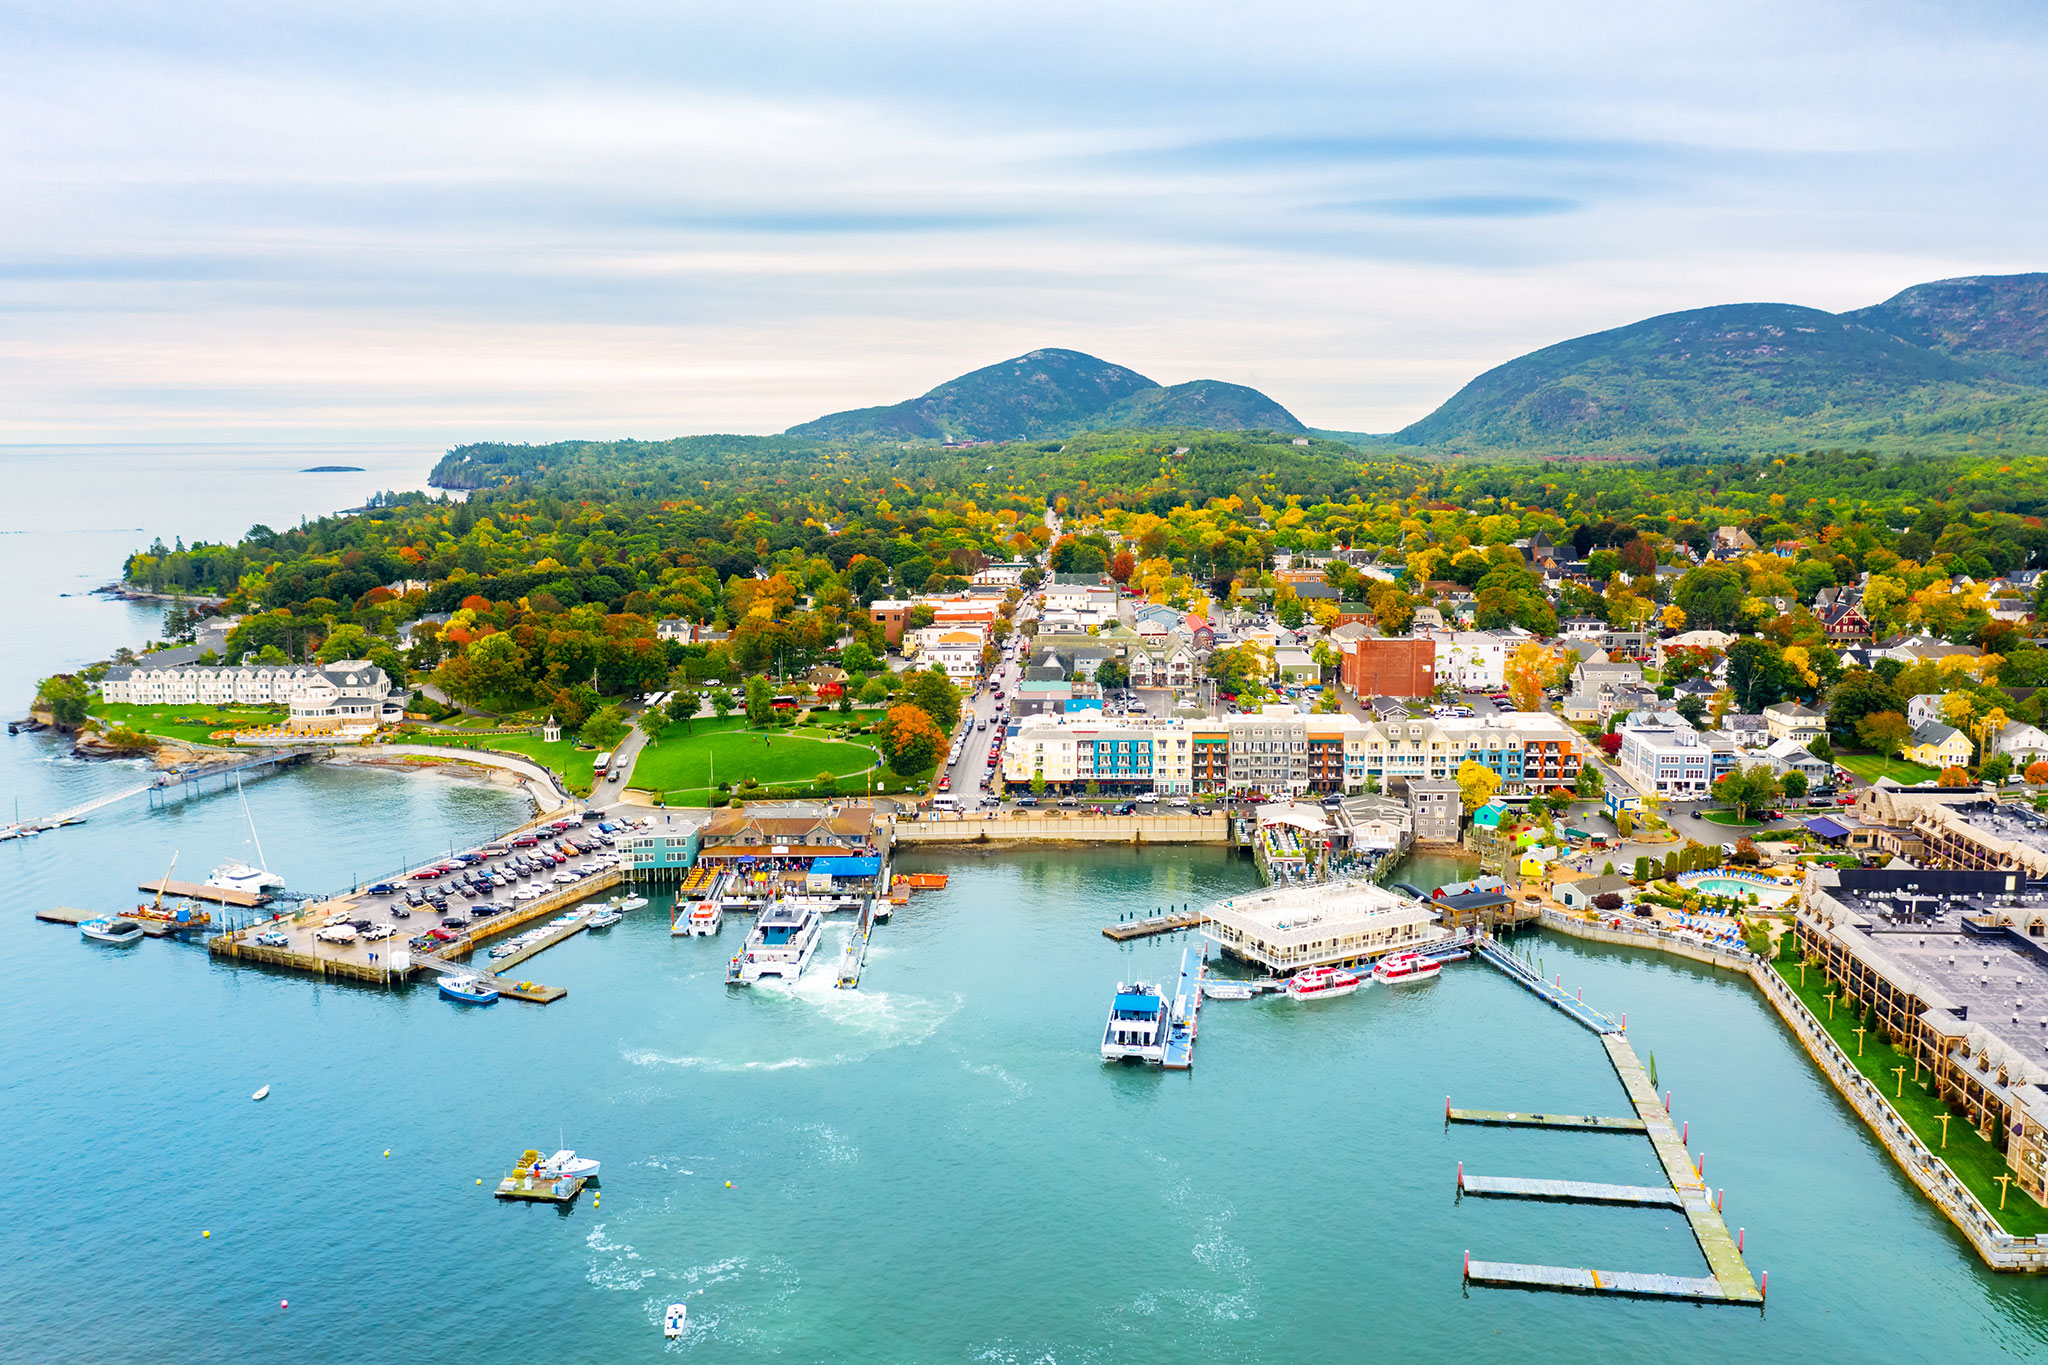 Aerial view of Bar Harbor with ships coming into dock, colonial-style buildings, and colorful trees dotting the town.